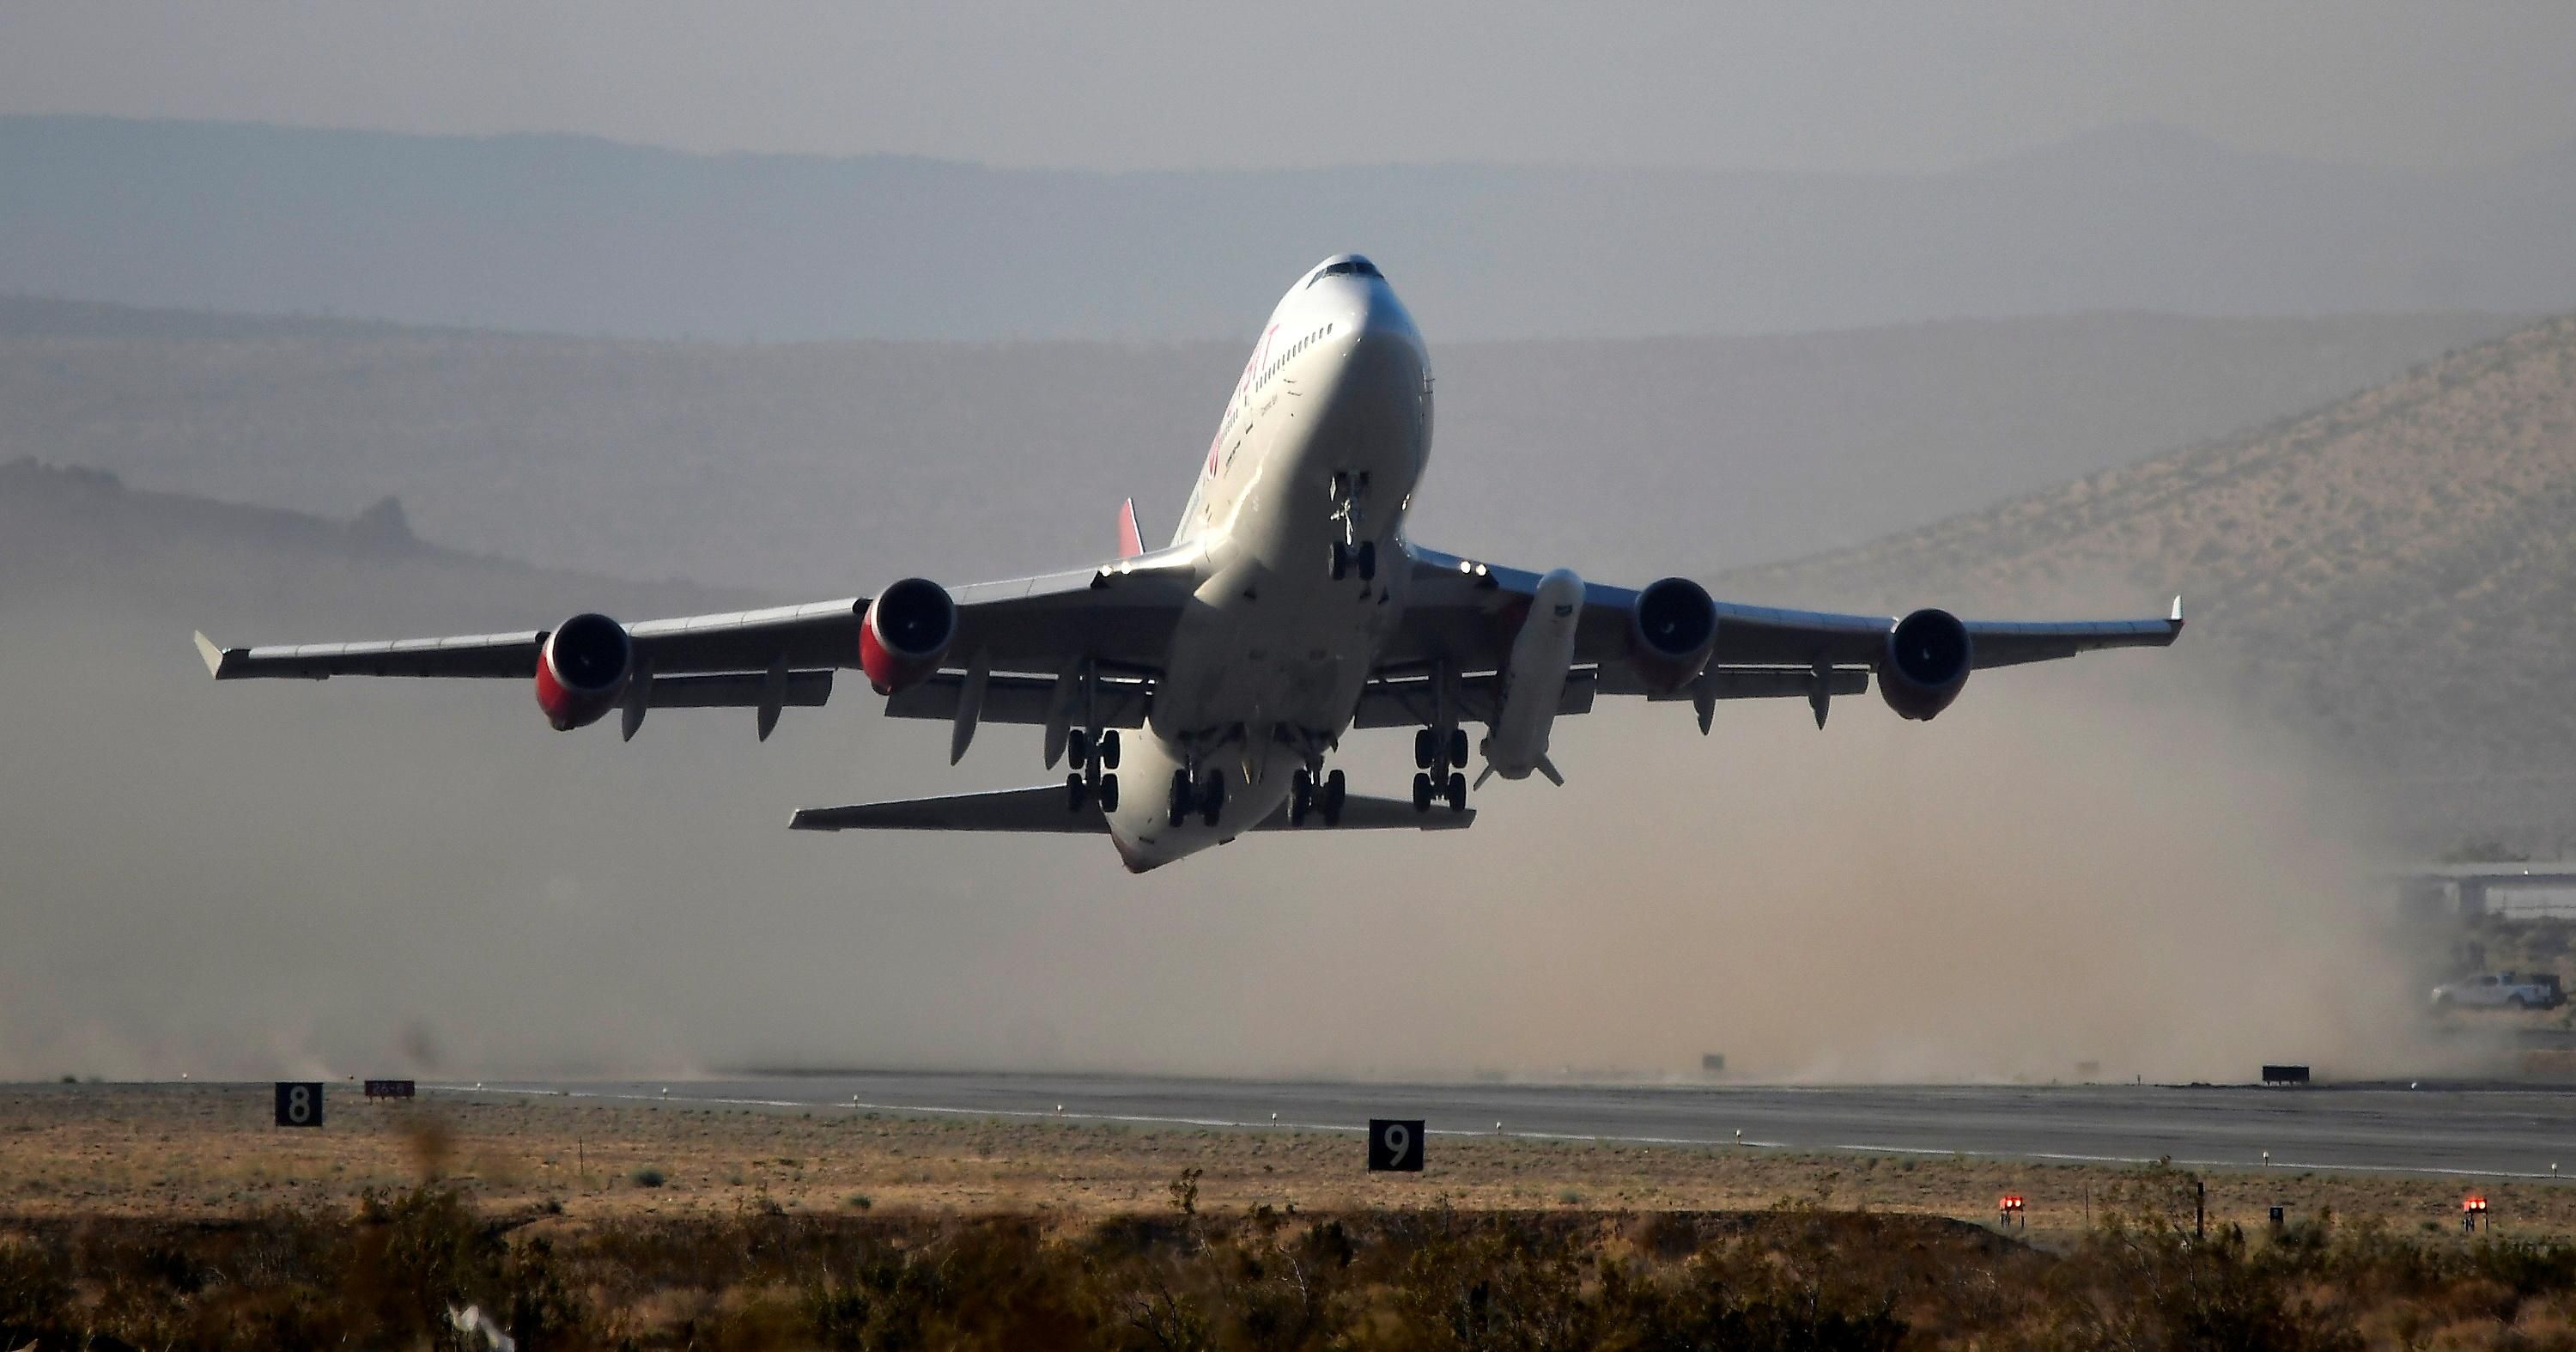 A modified Boeing 747 takes off carrying Virgin Orbit's LauncherOne rocket, in Mojave, California